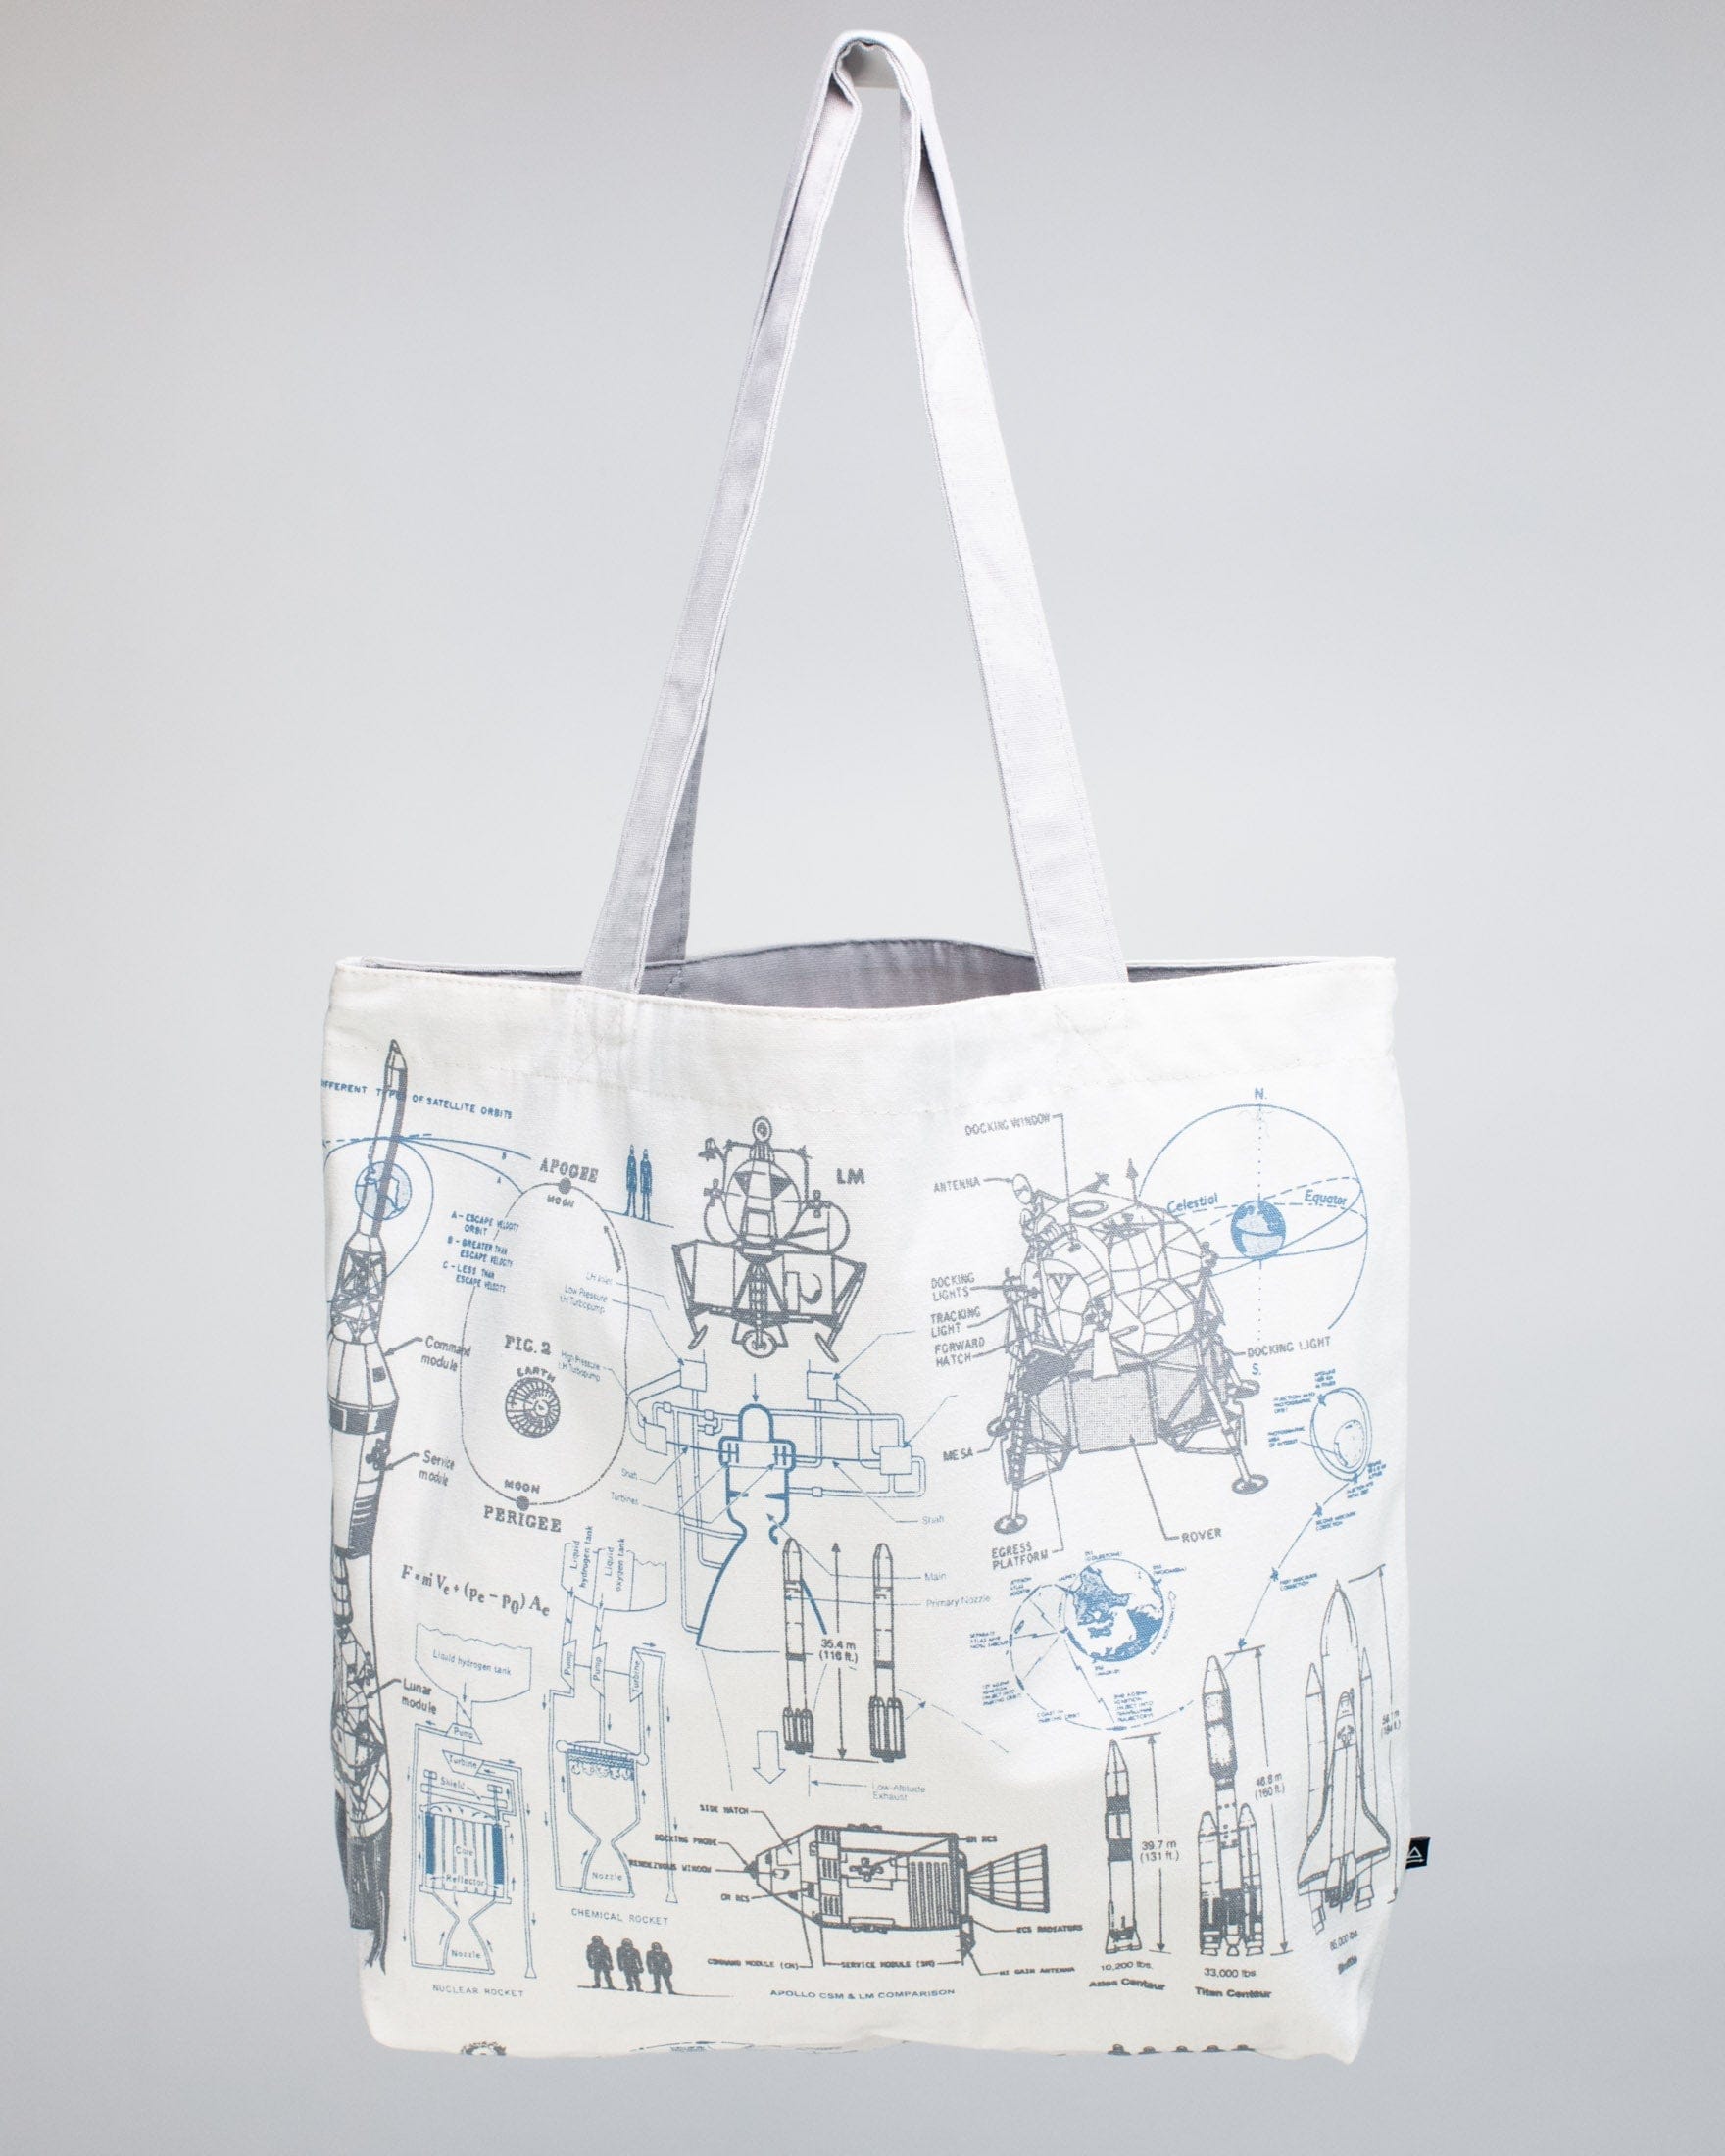 A Rocketry Canvas Shoulder Tote by Cognitive Surplus with drawings on it.